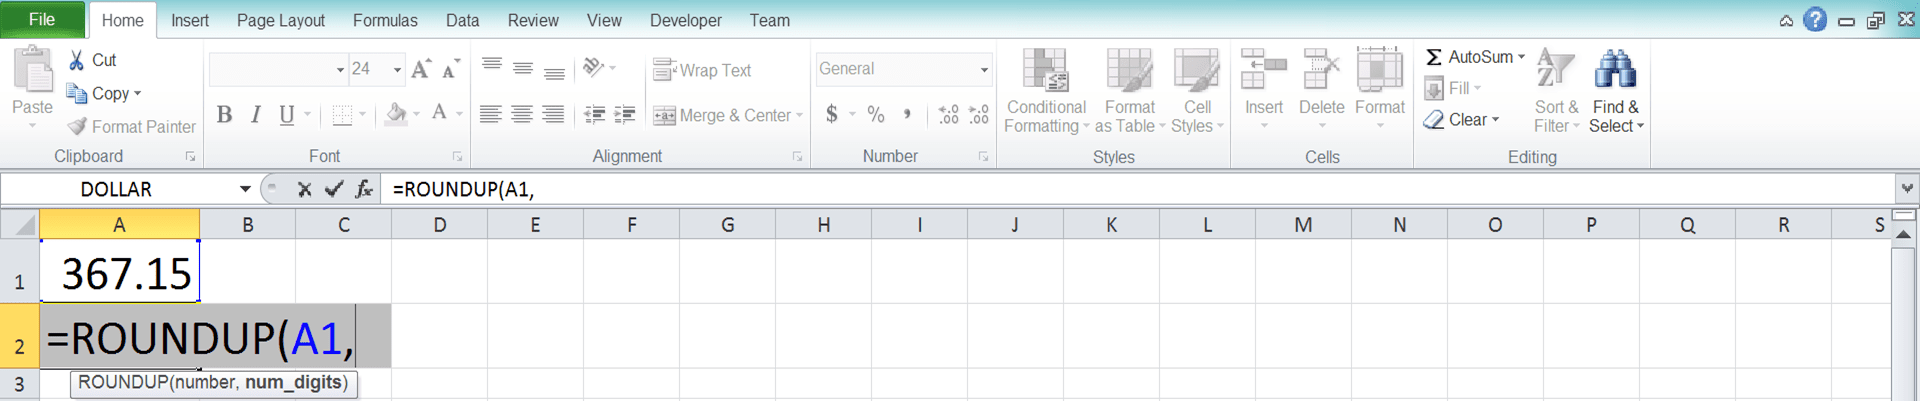 Excel ROUNDUP Formula: Functions, Examples, and How to Use - Screenshot of Step 3